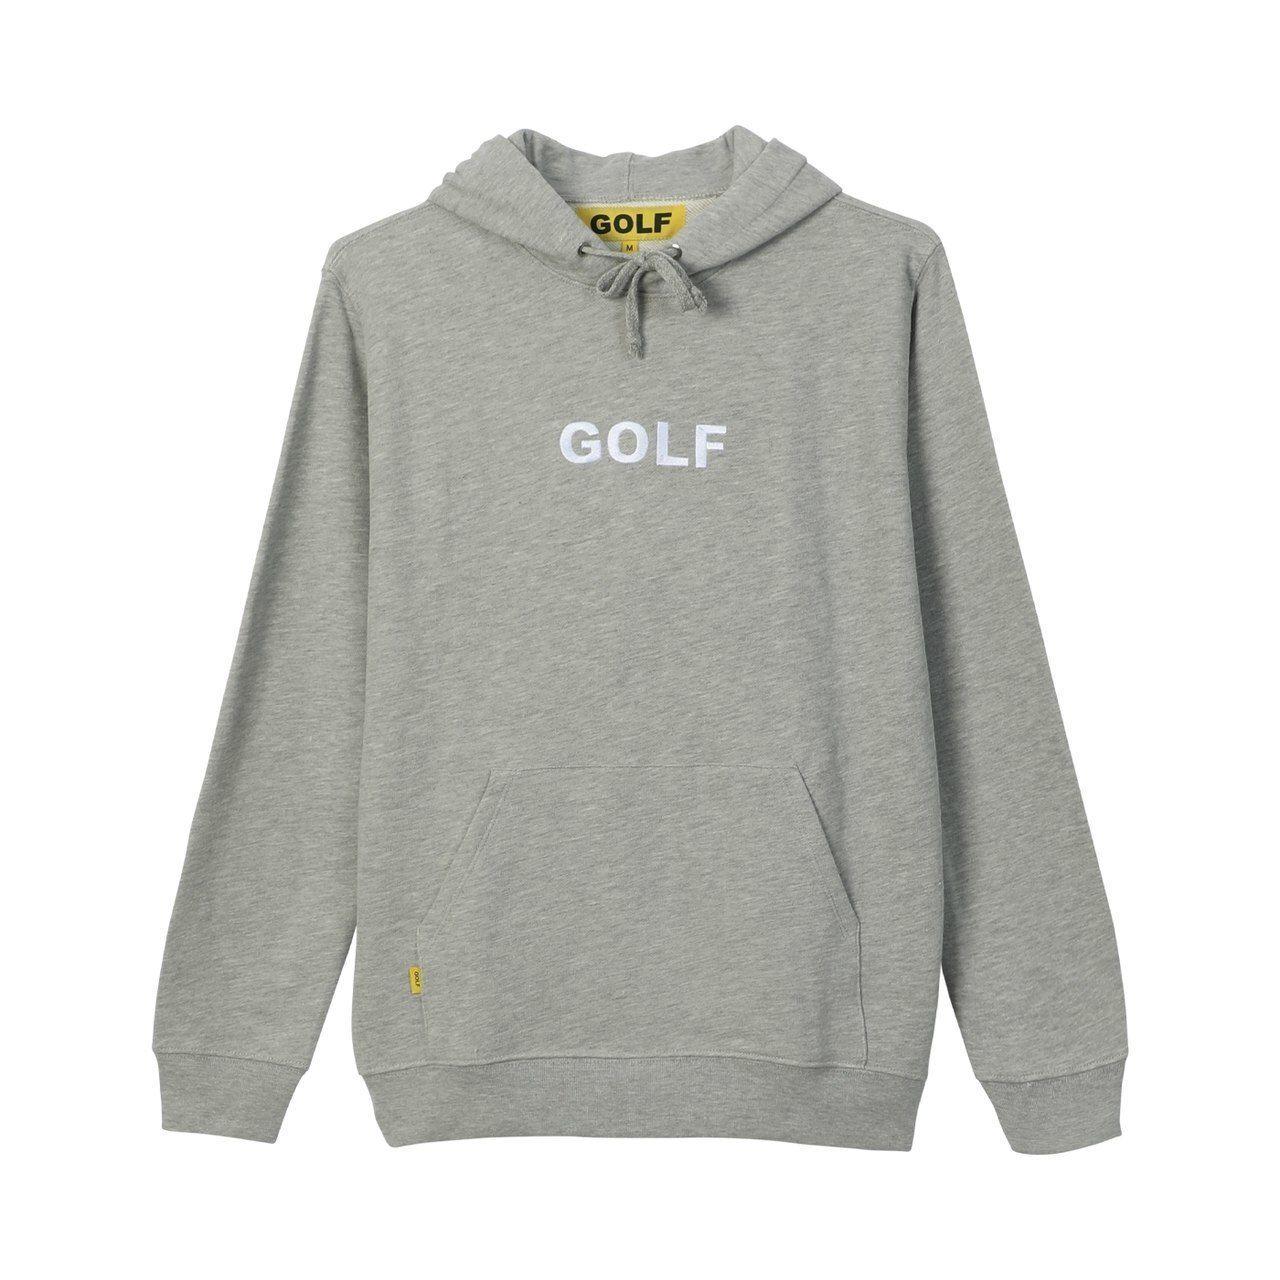 Sweater Logo - GOLF LOGO EMBROIDERED HOODIE by GOLF WANG